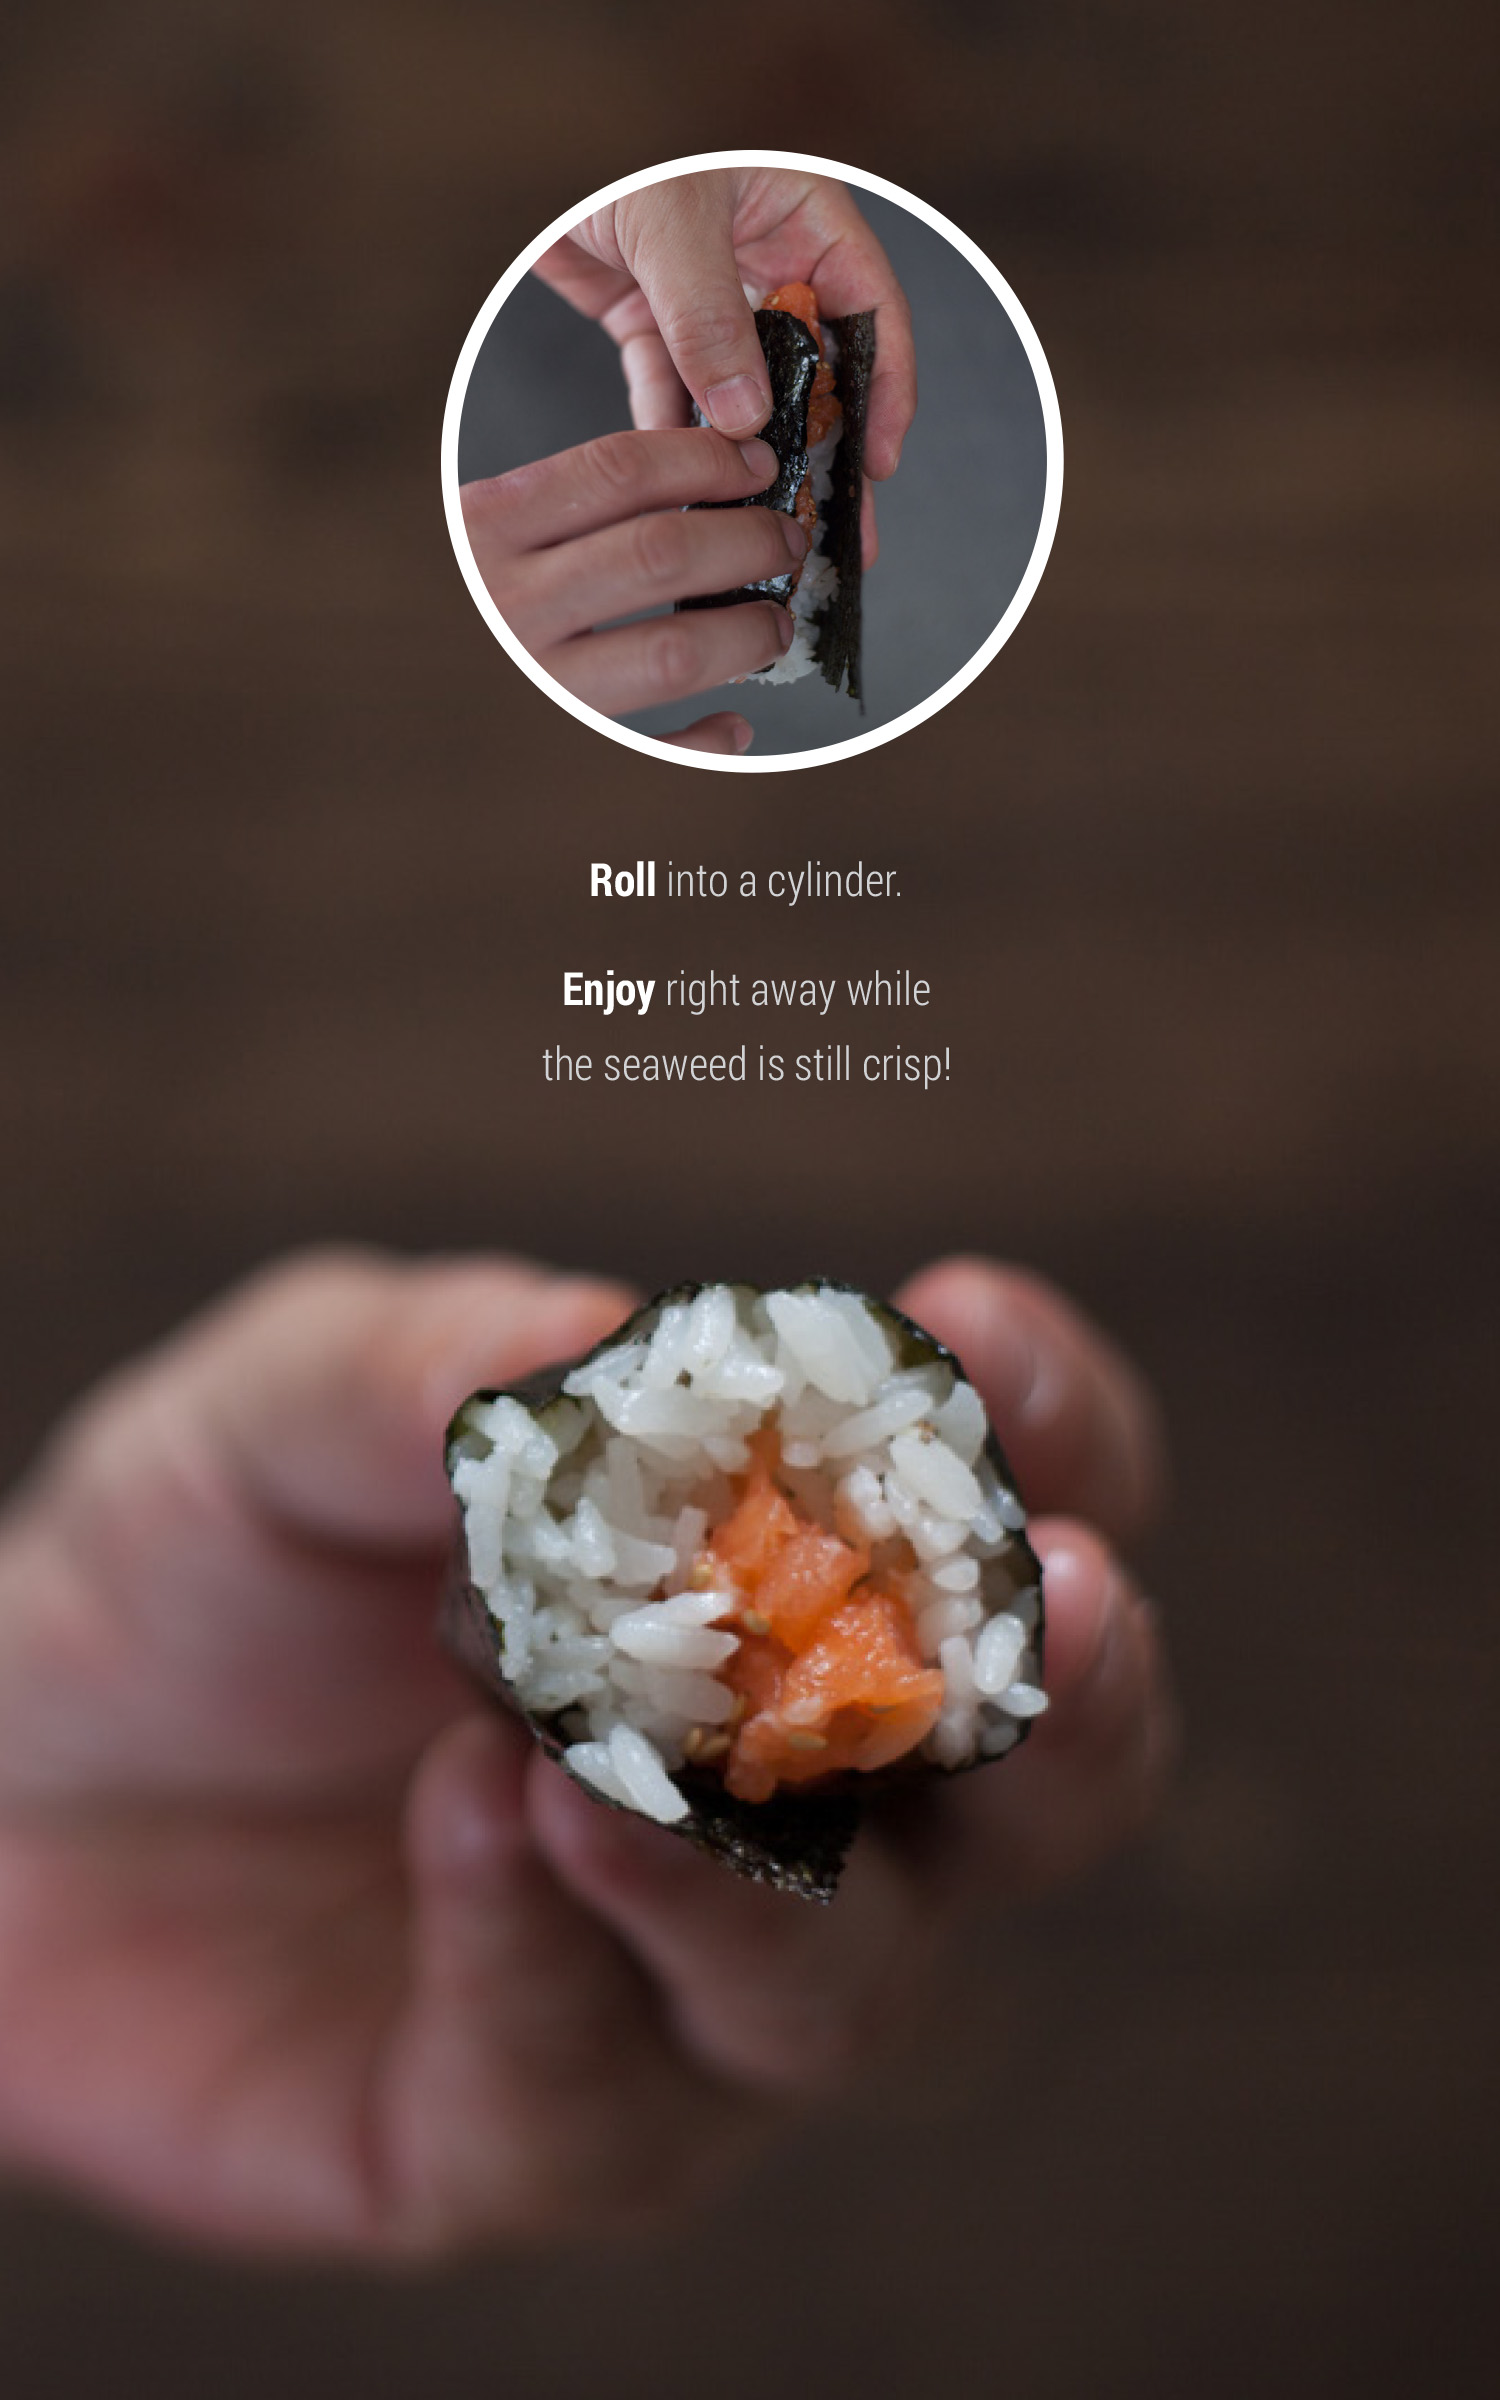 Photo of hand holding hand roll: 1. Roll into cylinder; enjoy right away while seaweed is still crisp.